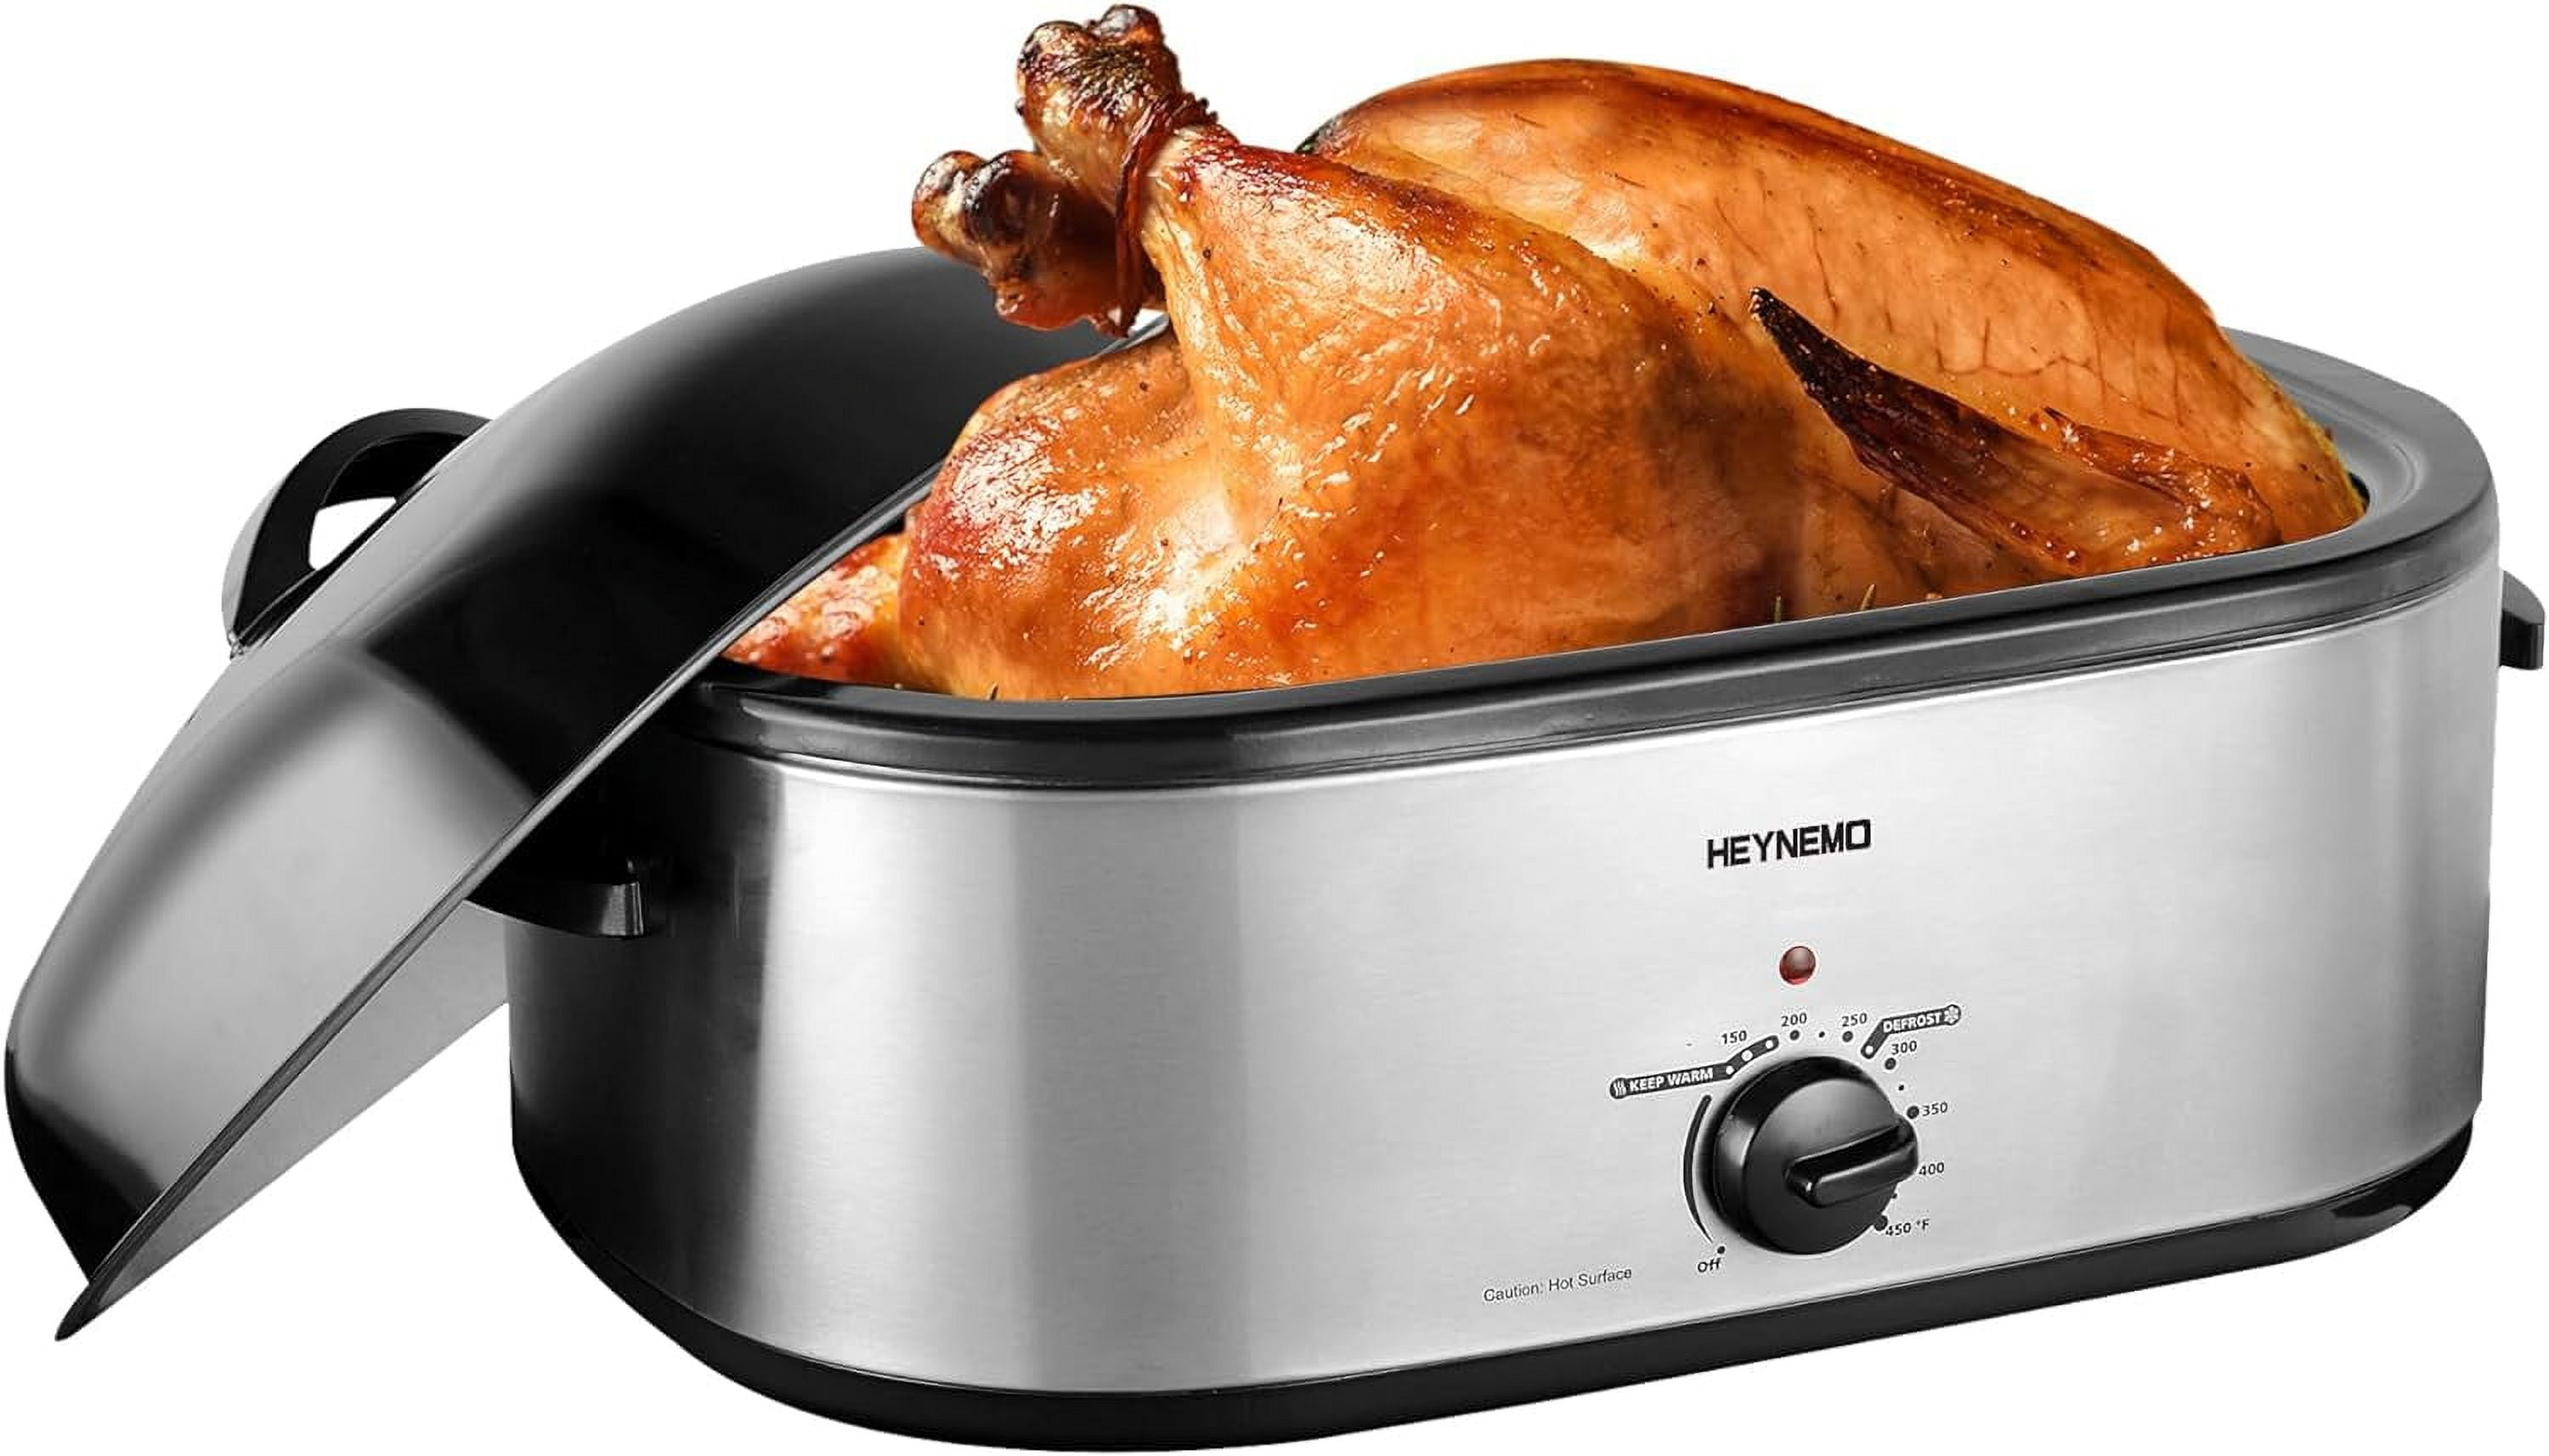 18L Mini Oven Countertop Roaster Oven With Timer For Multifunctional Home  Baking, Grill, Cake, Pizza, And Breakfast From Aircraftt, $256.44